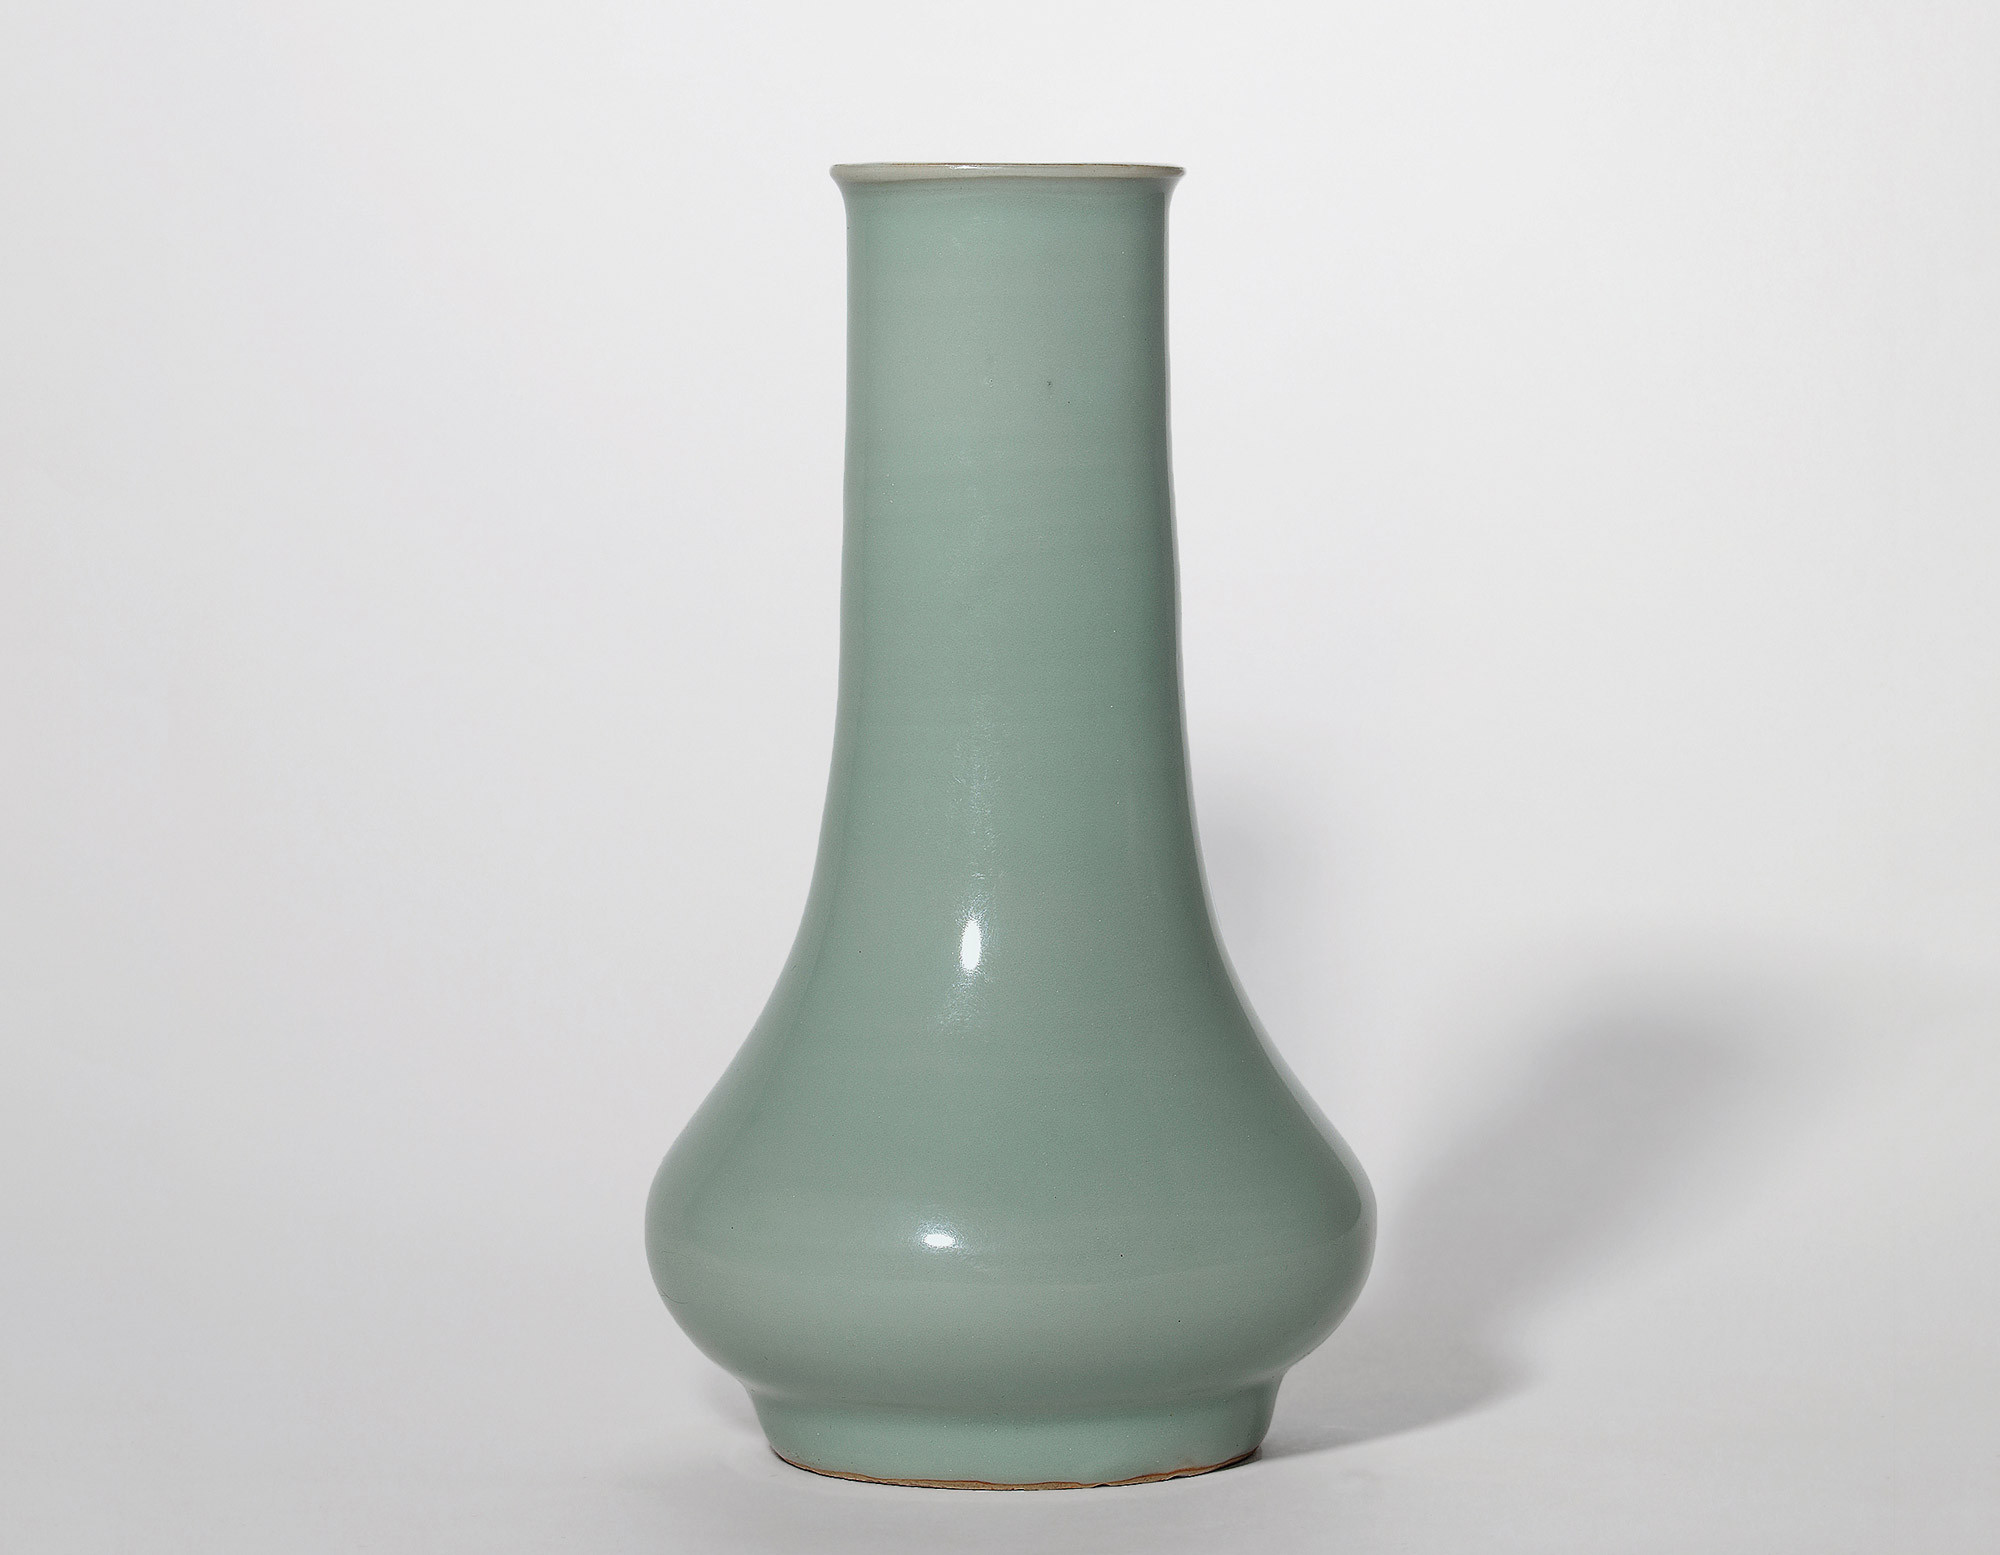 A LONGQUAN WARE STRAIGHT-NECK VASE